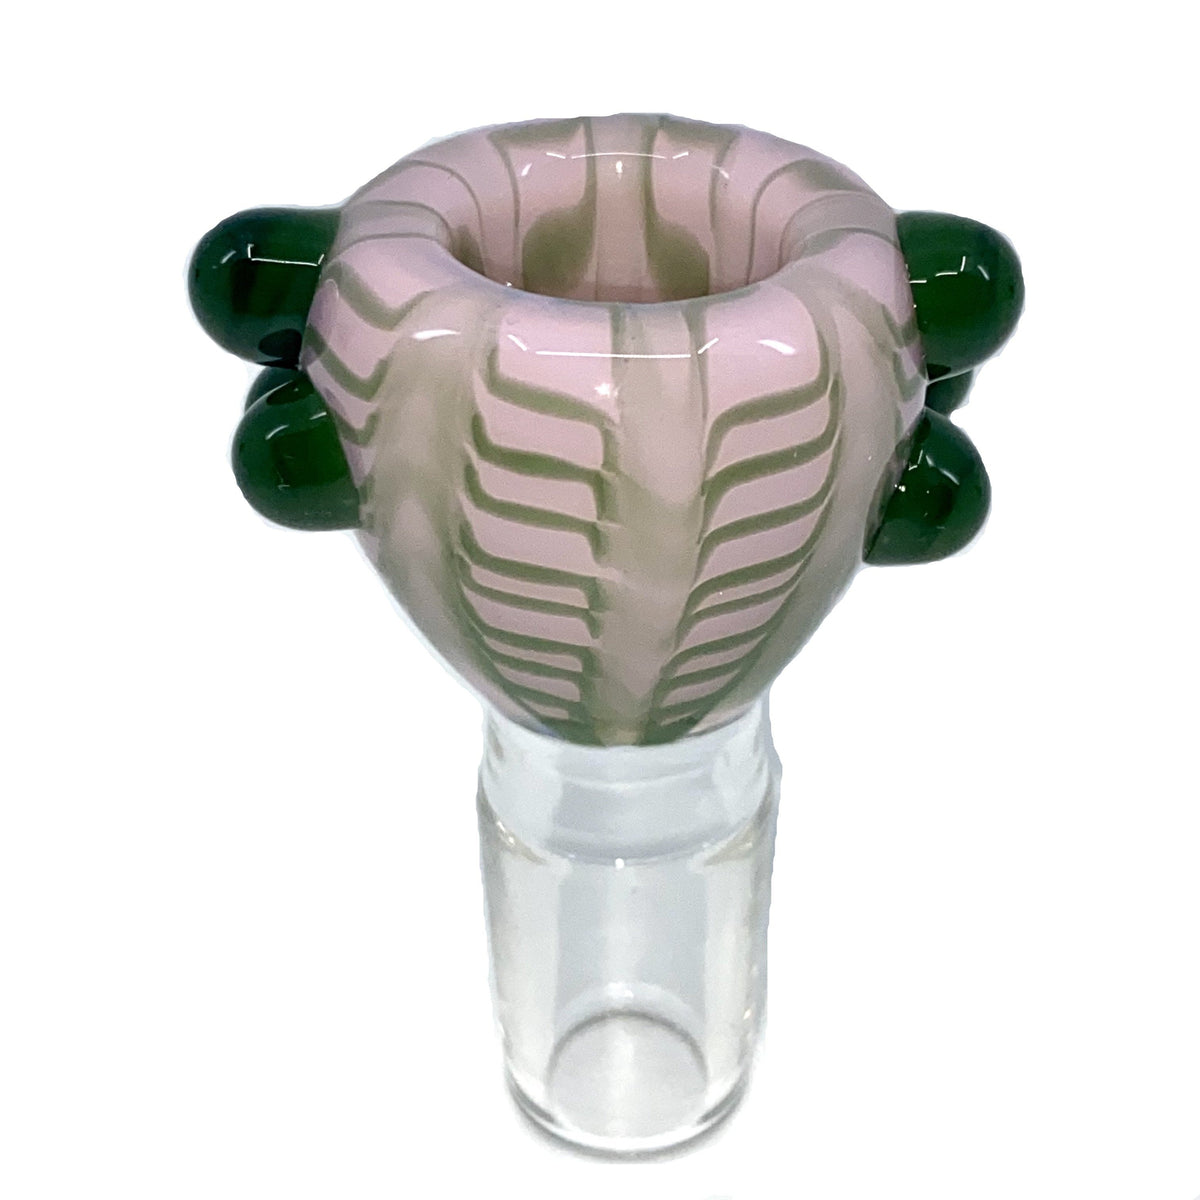 Colored Wrap and Rake Push Bowl Slide 18mm (Pink/Green) show variants